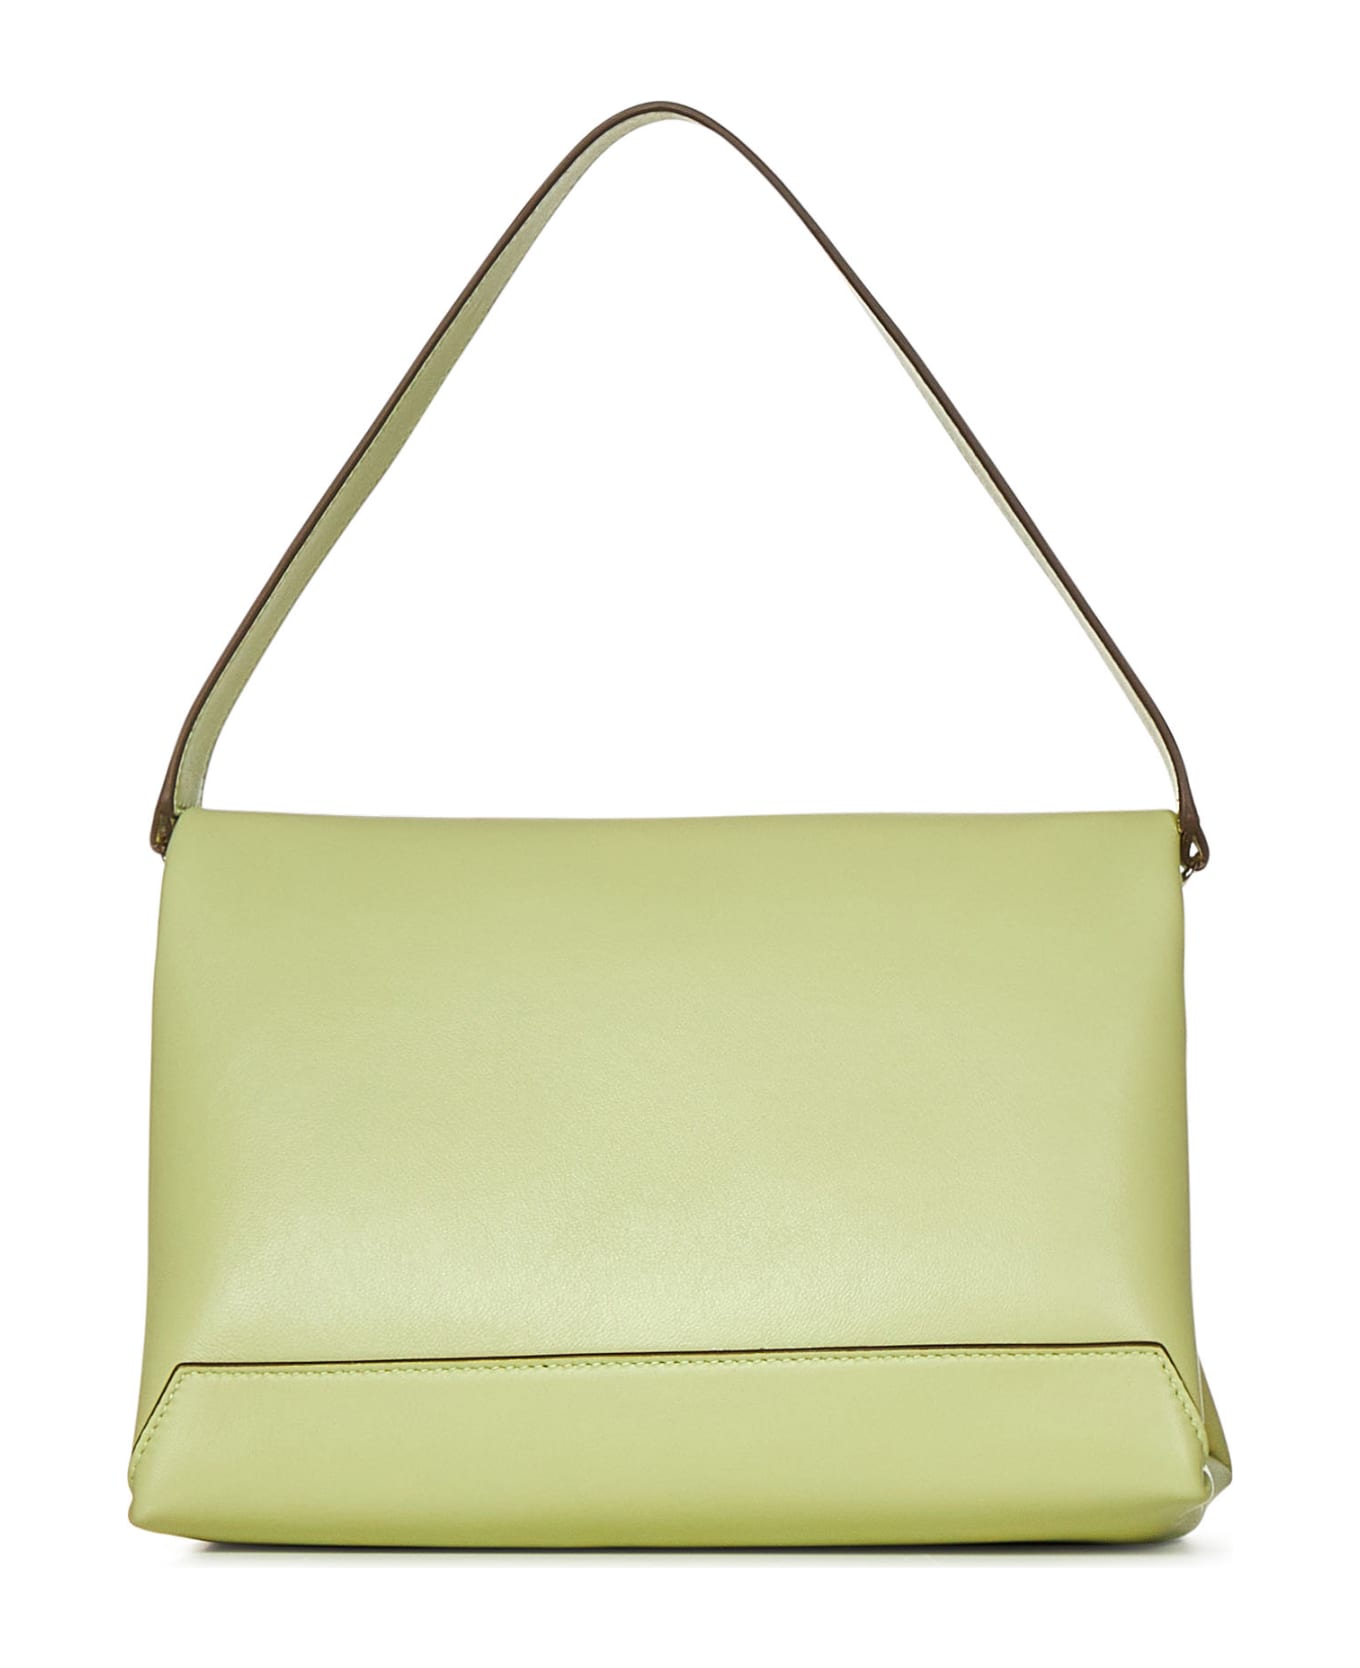 Victoria Beckham Chain Pouch With Strap Clutch - Green クラッチバッグ